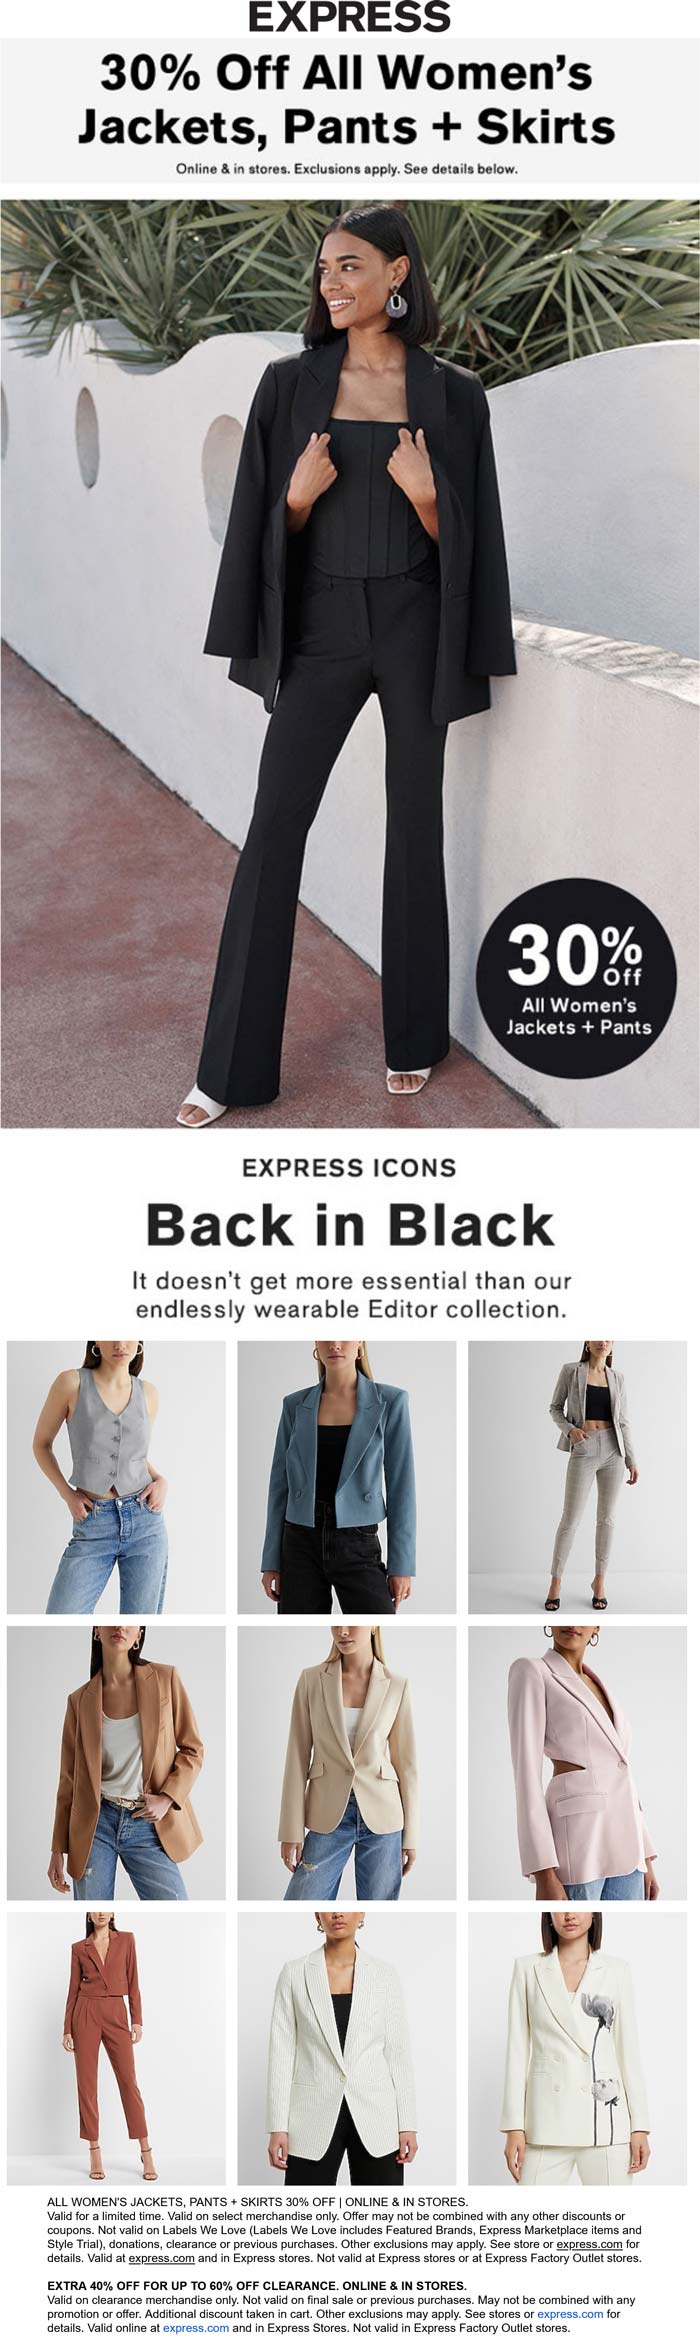 Express stores Coupon  30% off all pants jackets & skirts + extra 40% off clearance at Express, ditto online #express 